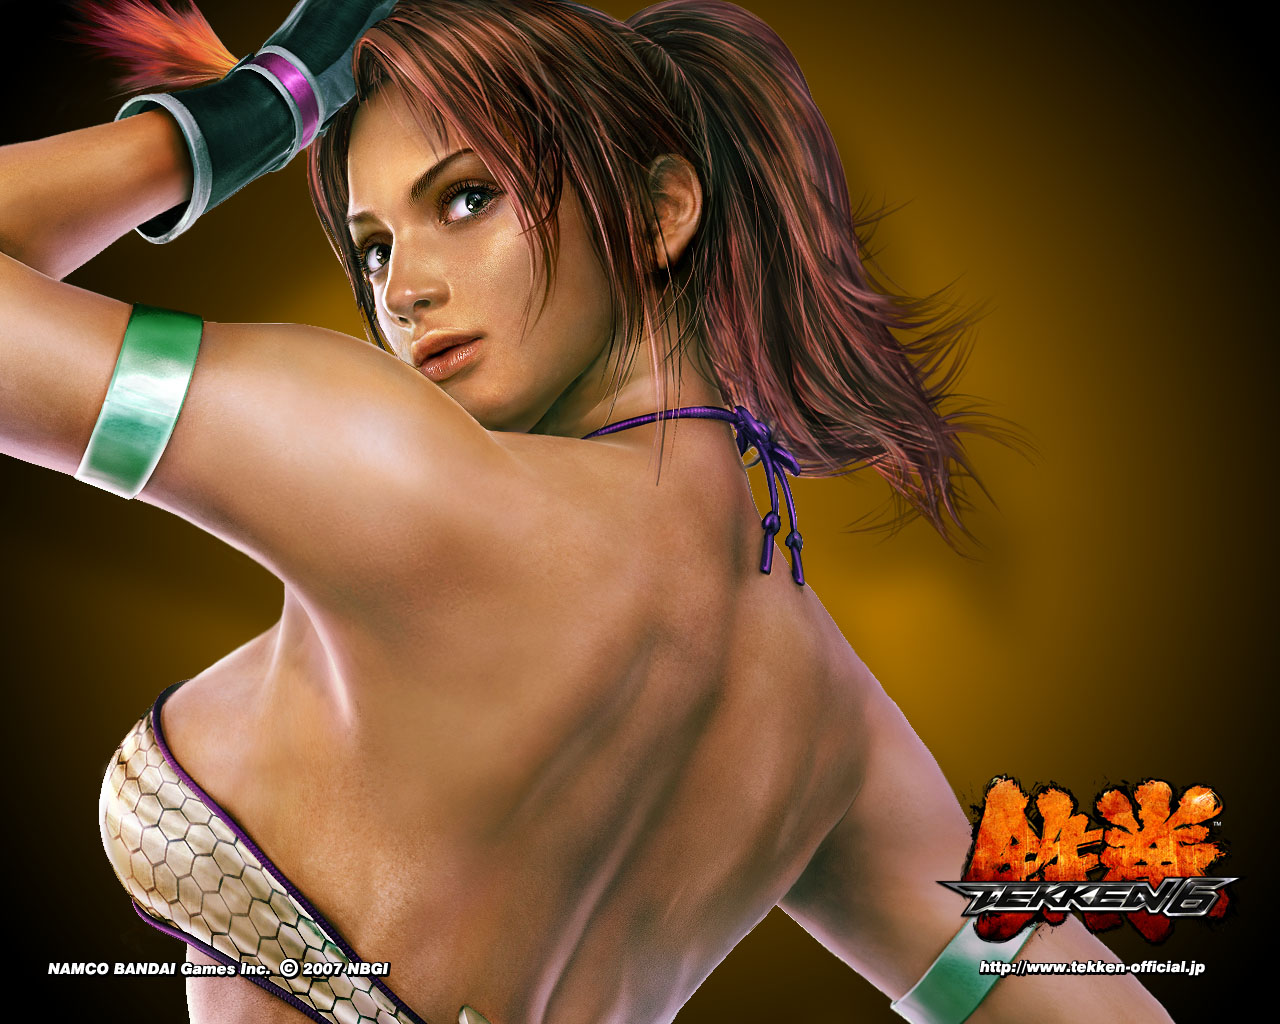 HD wallpapers: All Characters of Tekken 6 Game HD Wallpapers in ...